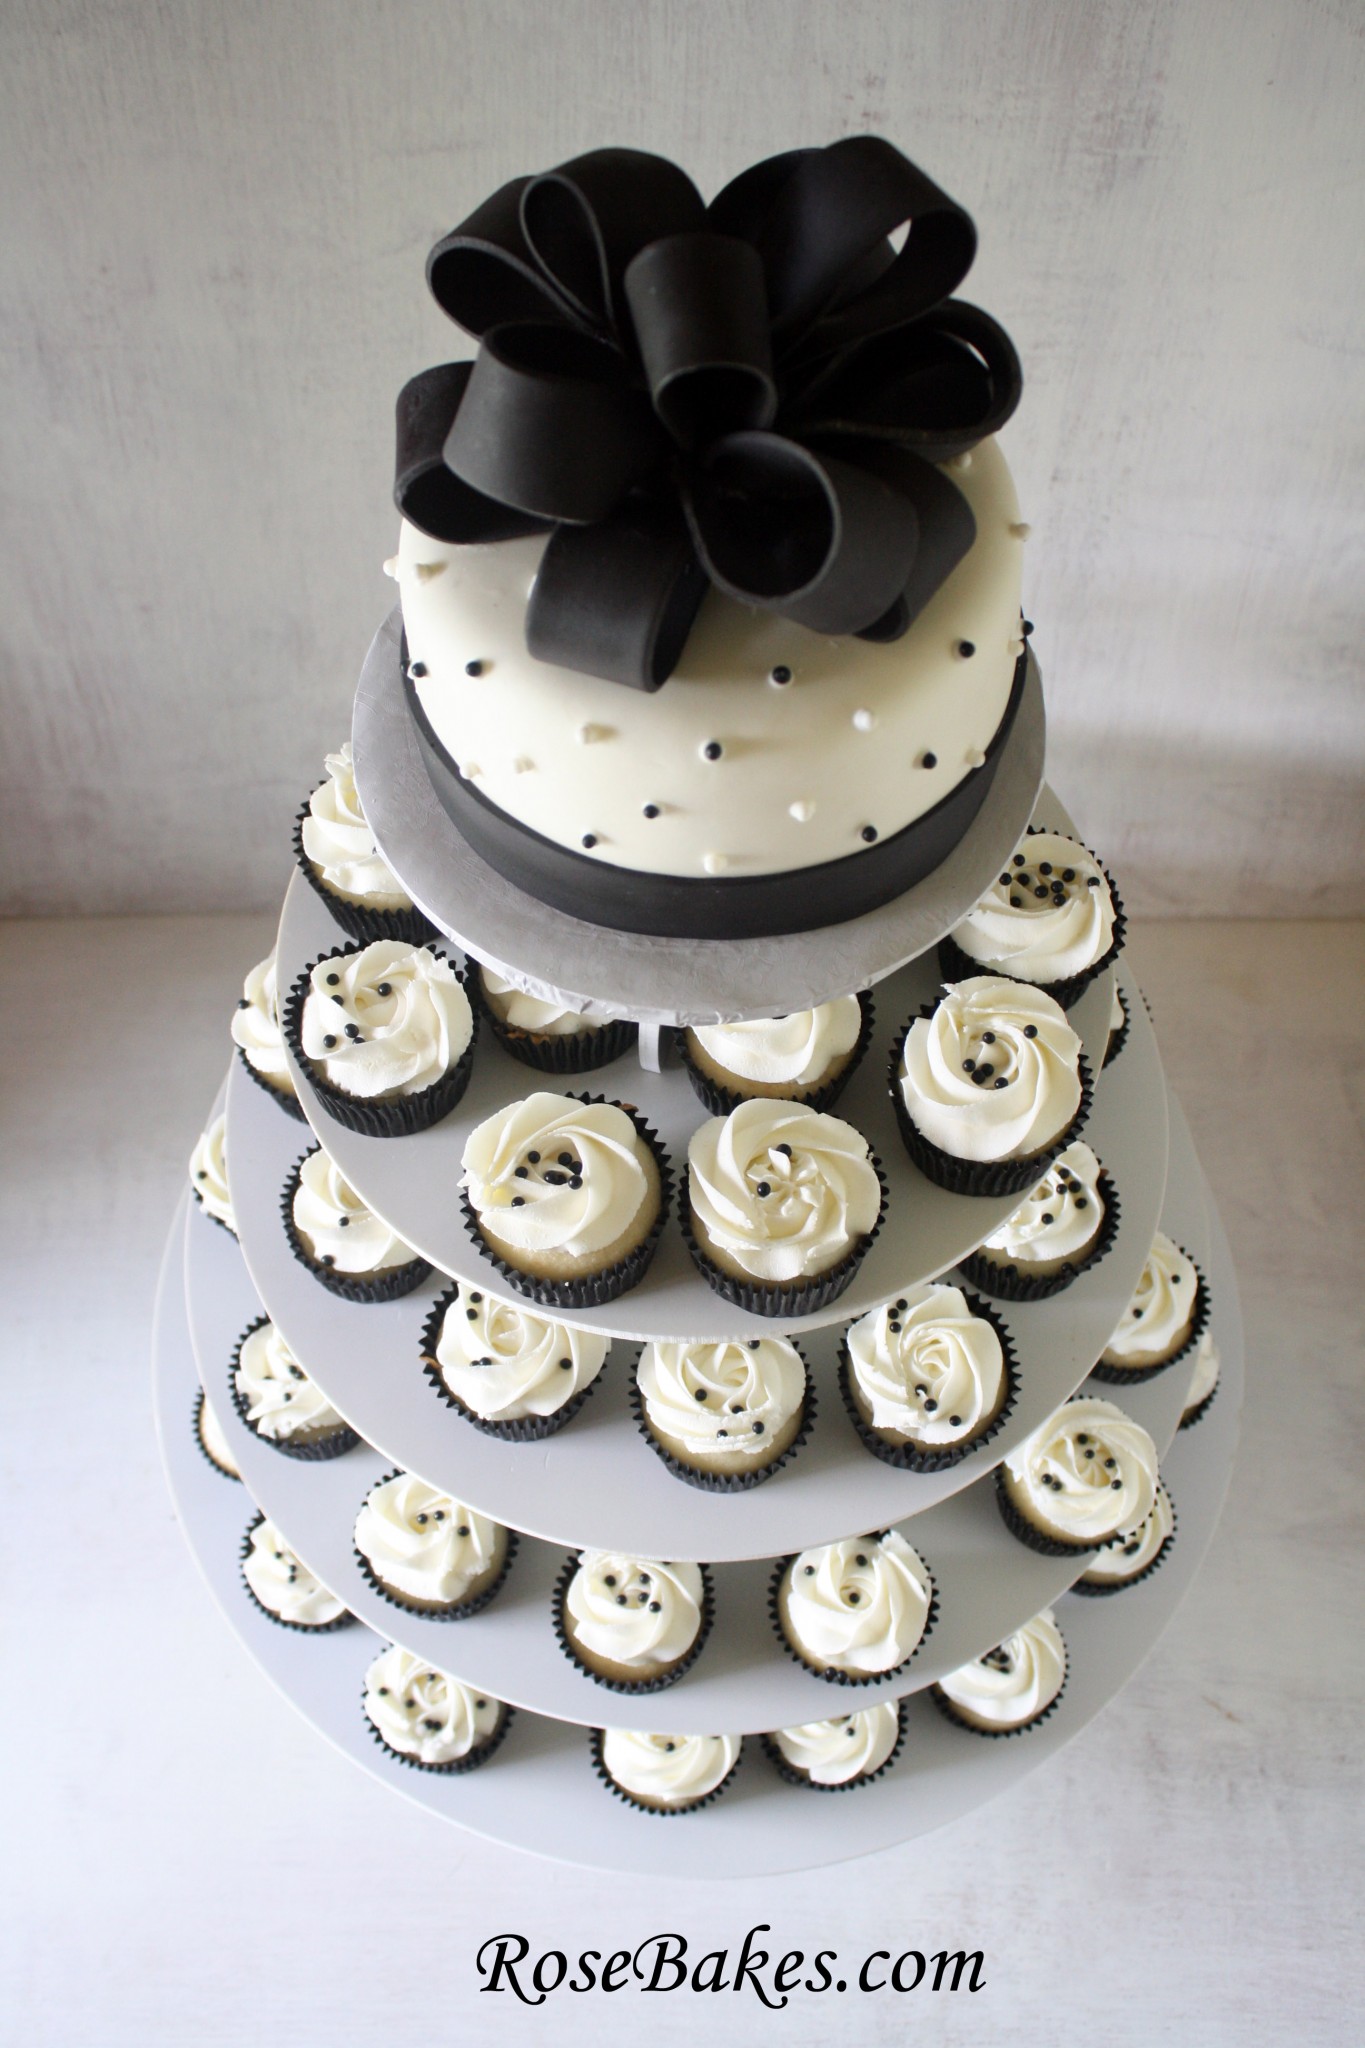 Black and White Wedding Cake with Cupcakes